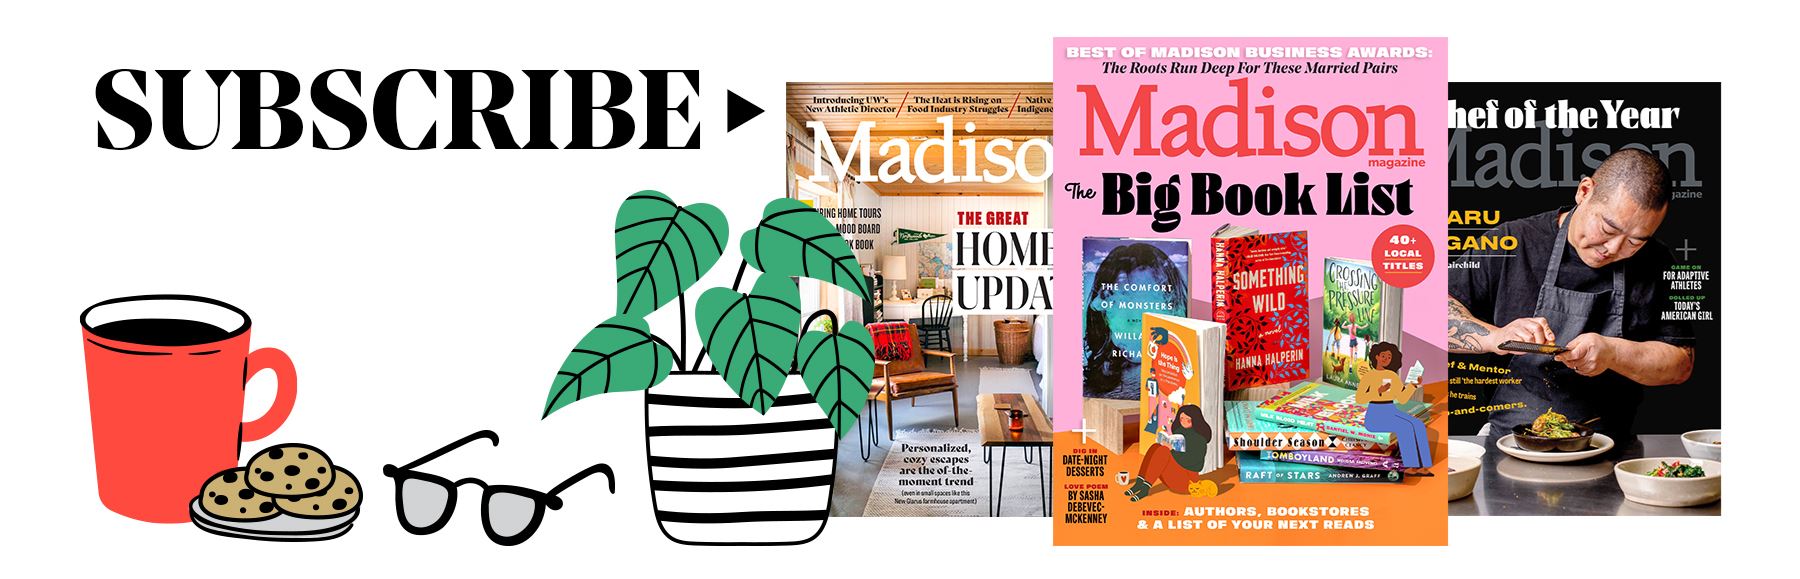 Subscribe with three covers of Madison Magazine